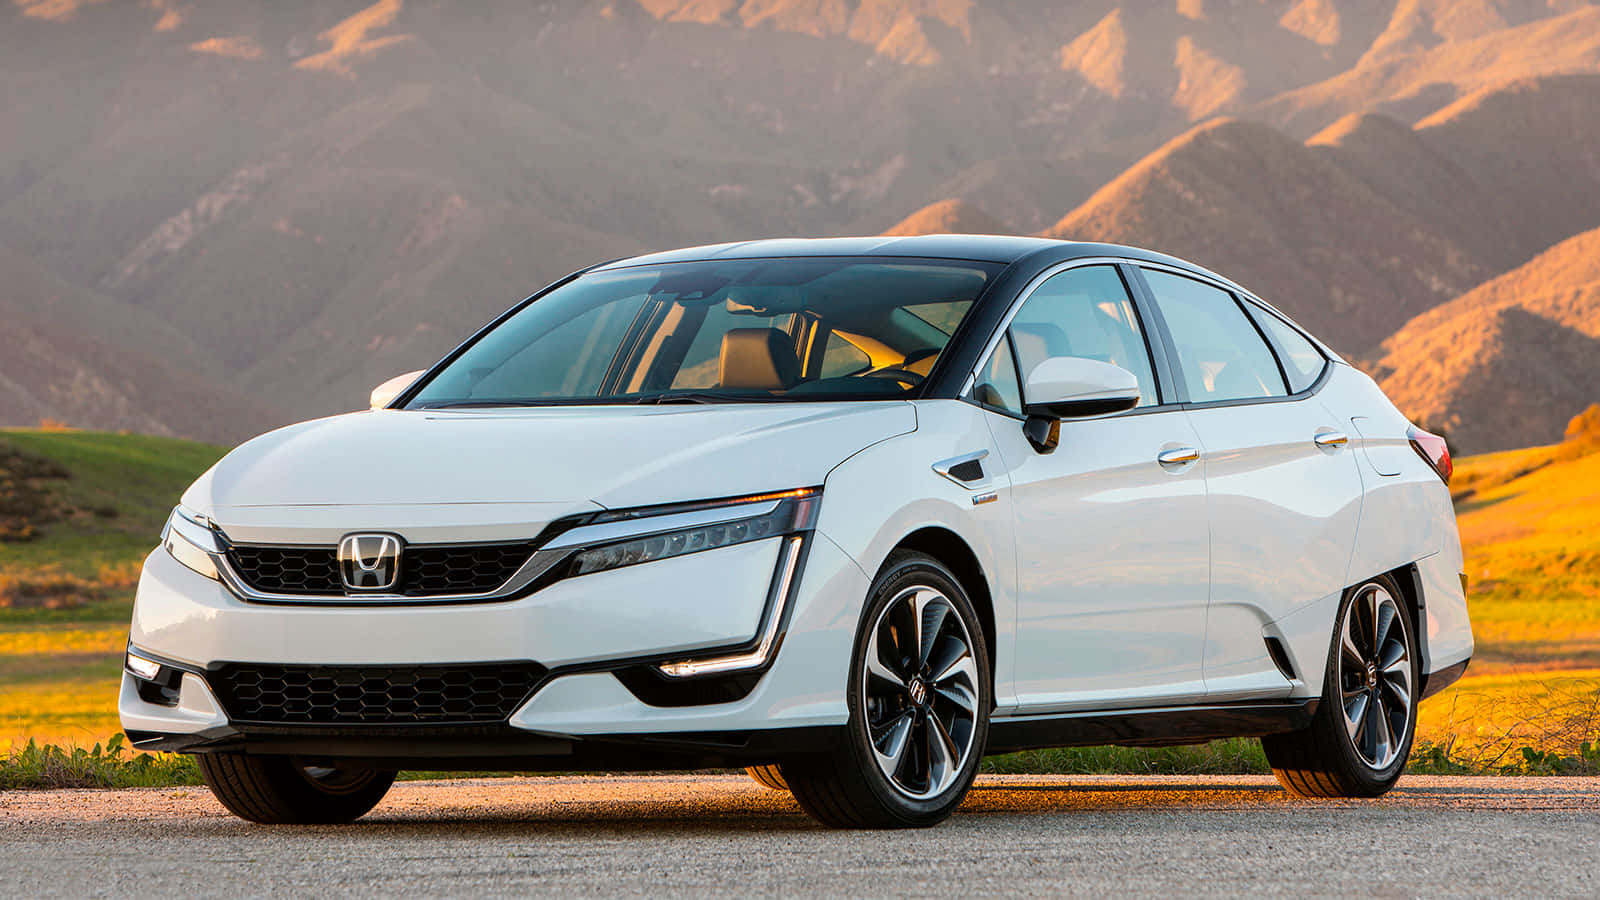 Stunning Honda Clarity in Motion with a Majestic Sunset Background Wallpaper